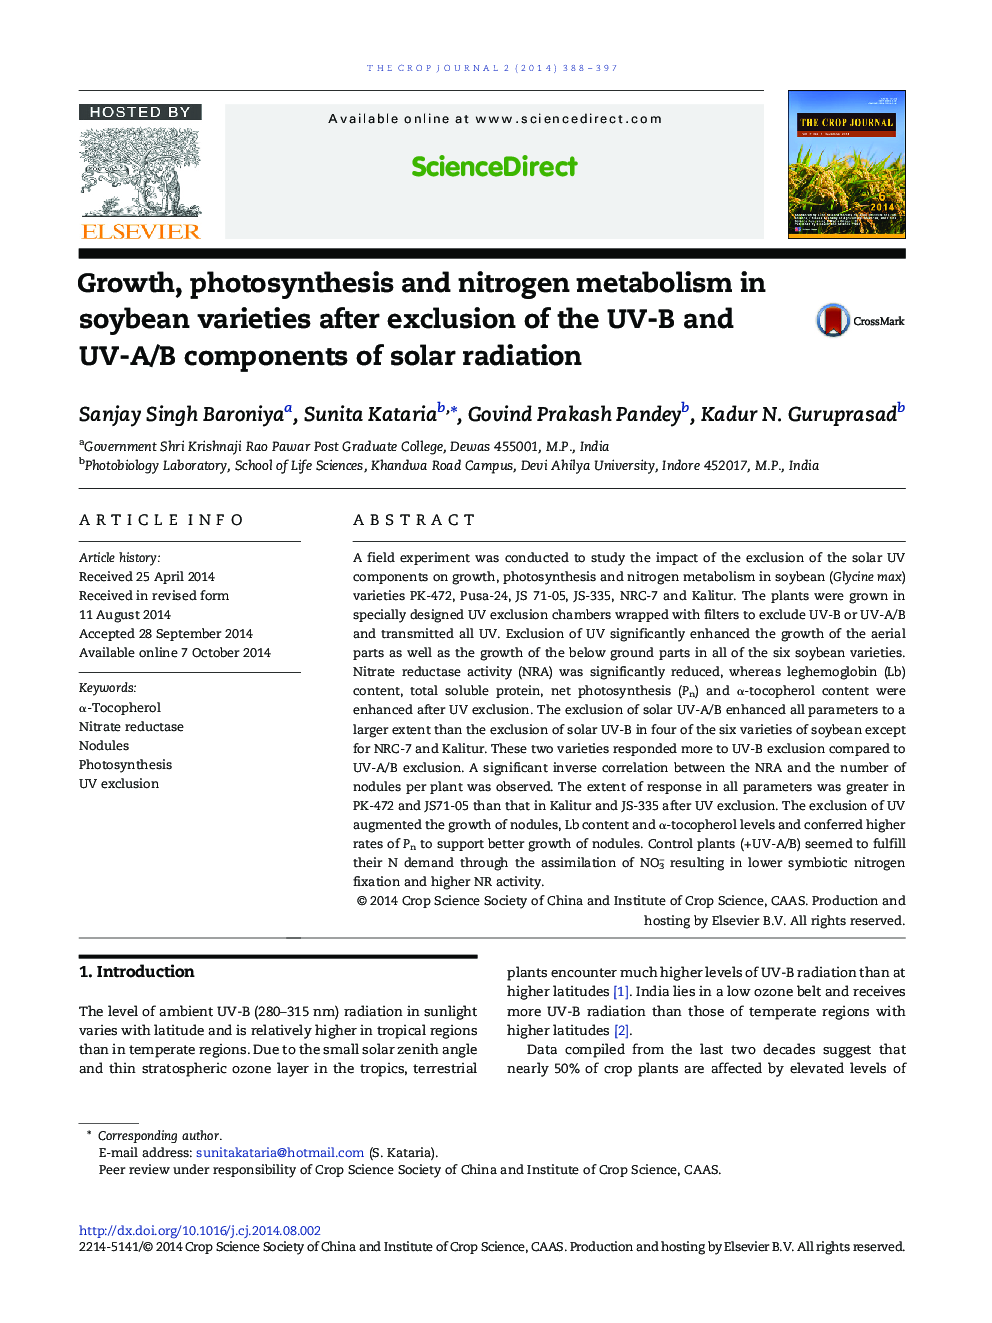 Growth, photosynthesis and nitrogen metabolism in soybean varieties after exclusion of the UV-B and UV-A/B components of solar radiation